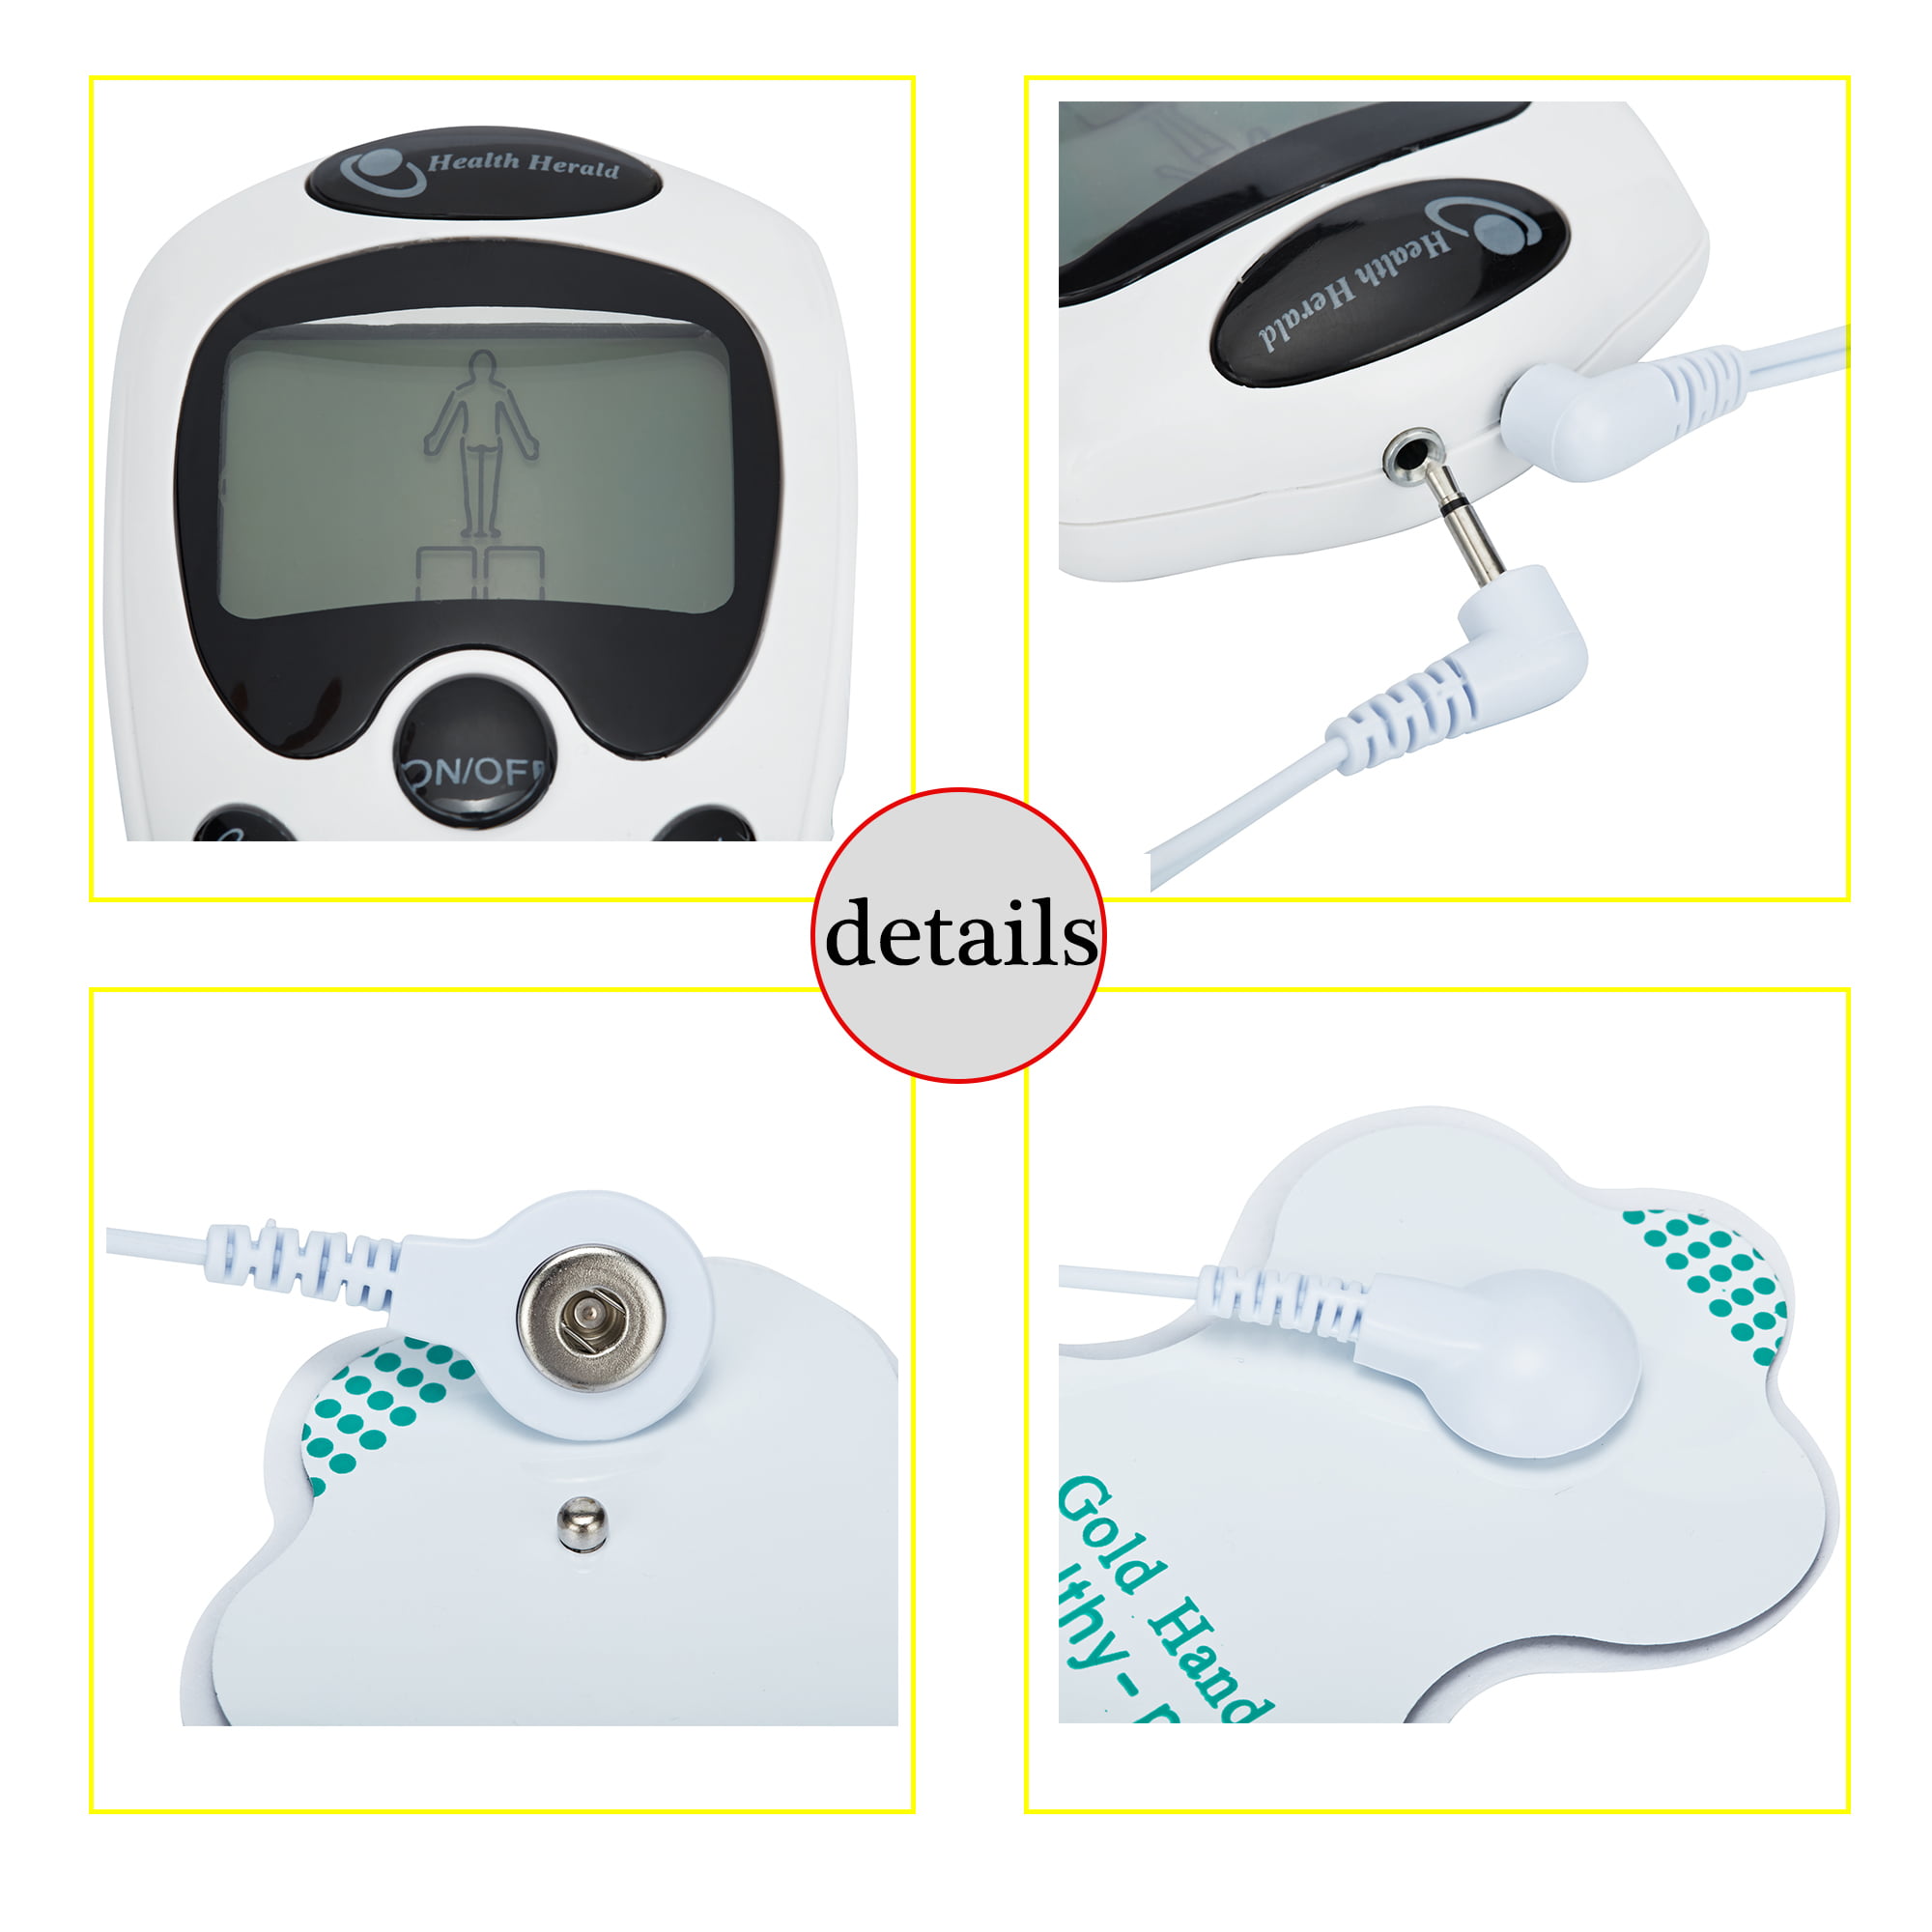 Electronic TENS Unit Pulse Massager by TruMedic - Product Review - My  DairyFree GlutenFree Life